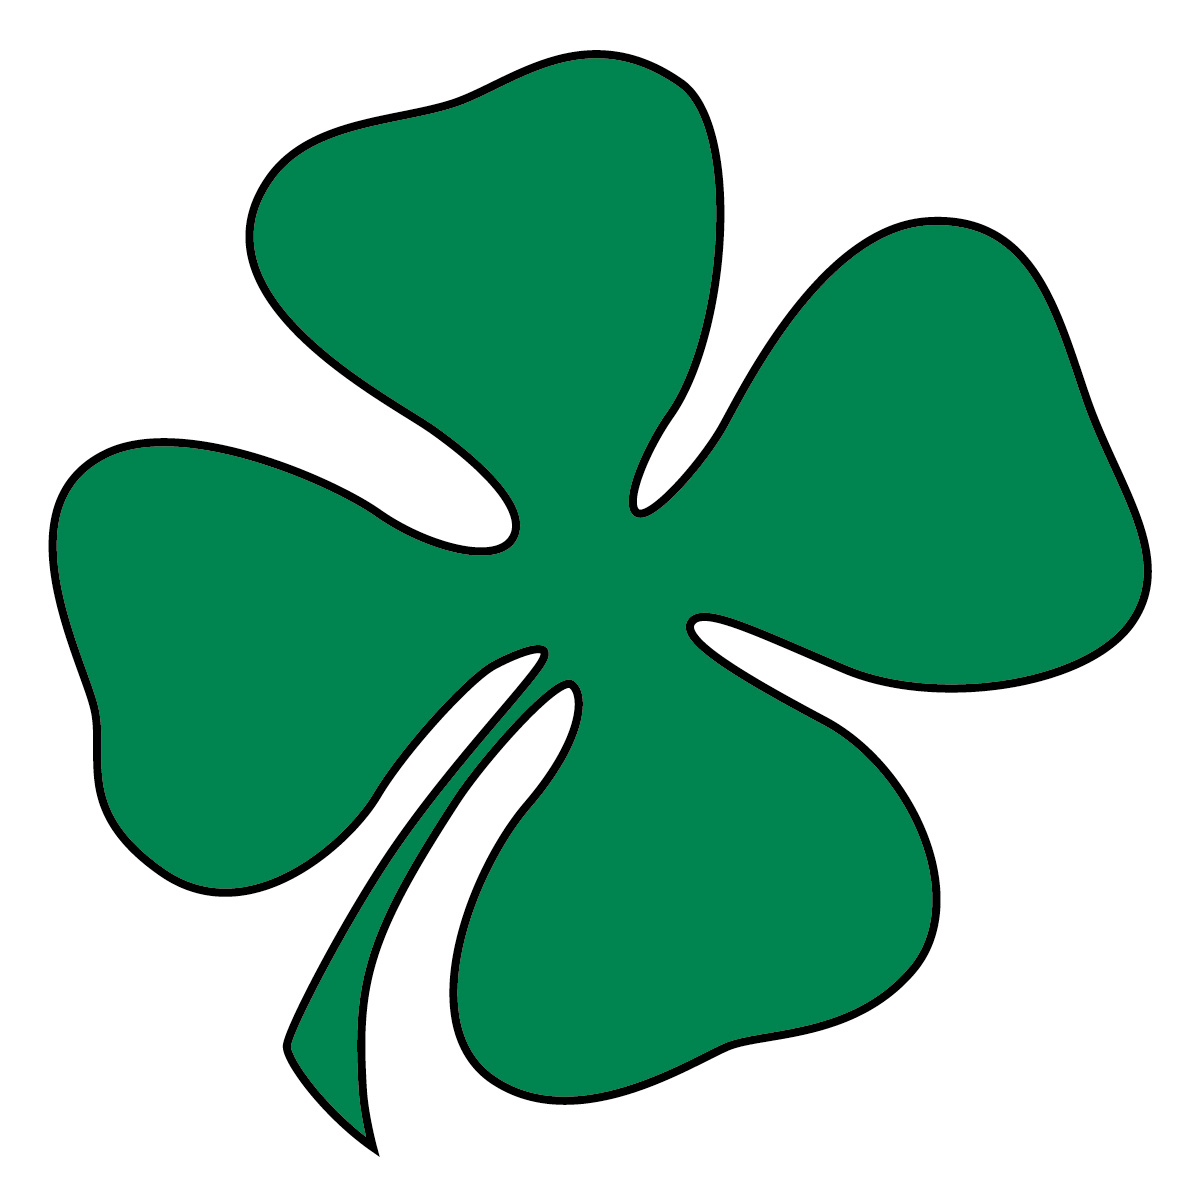 Images Of Four Leaf Clovers - ClipArt Best